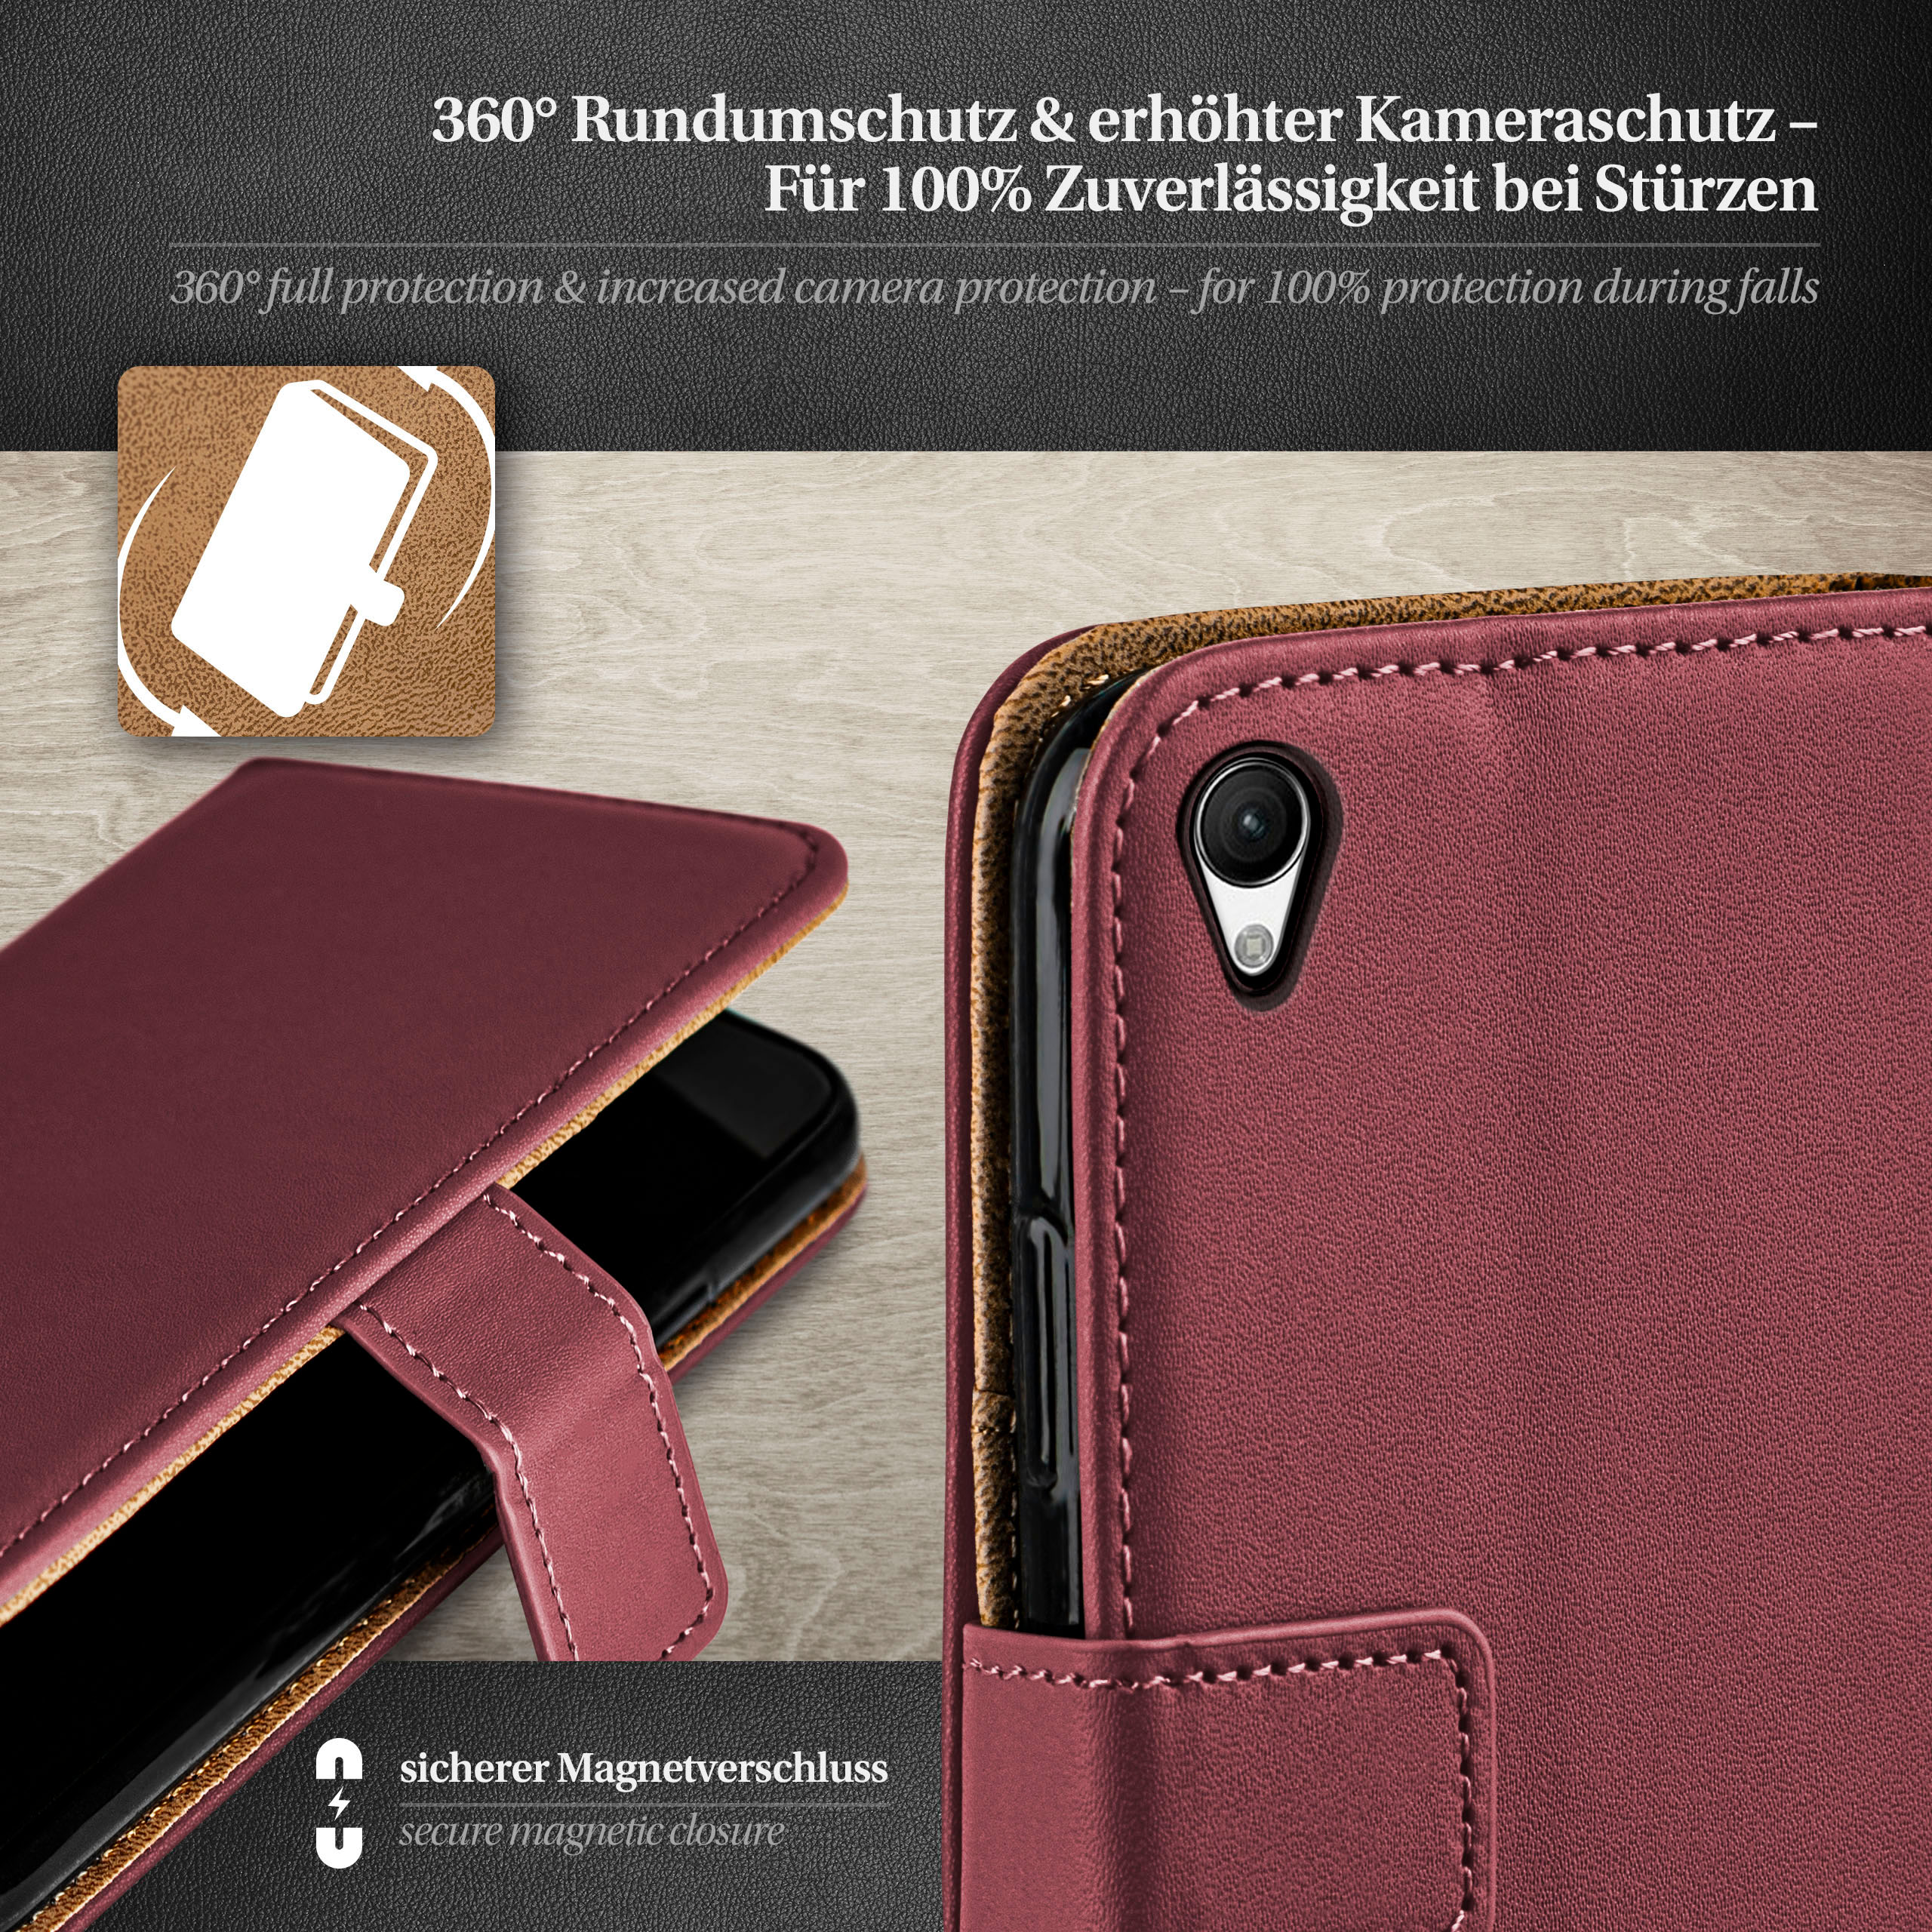 MOEX Book Case, Bookcover, Sony, Maroon-Red Xperia Z3